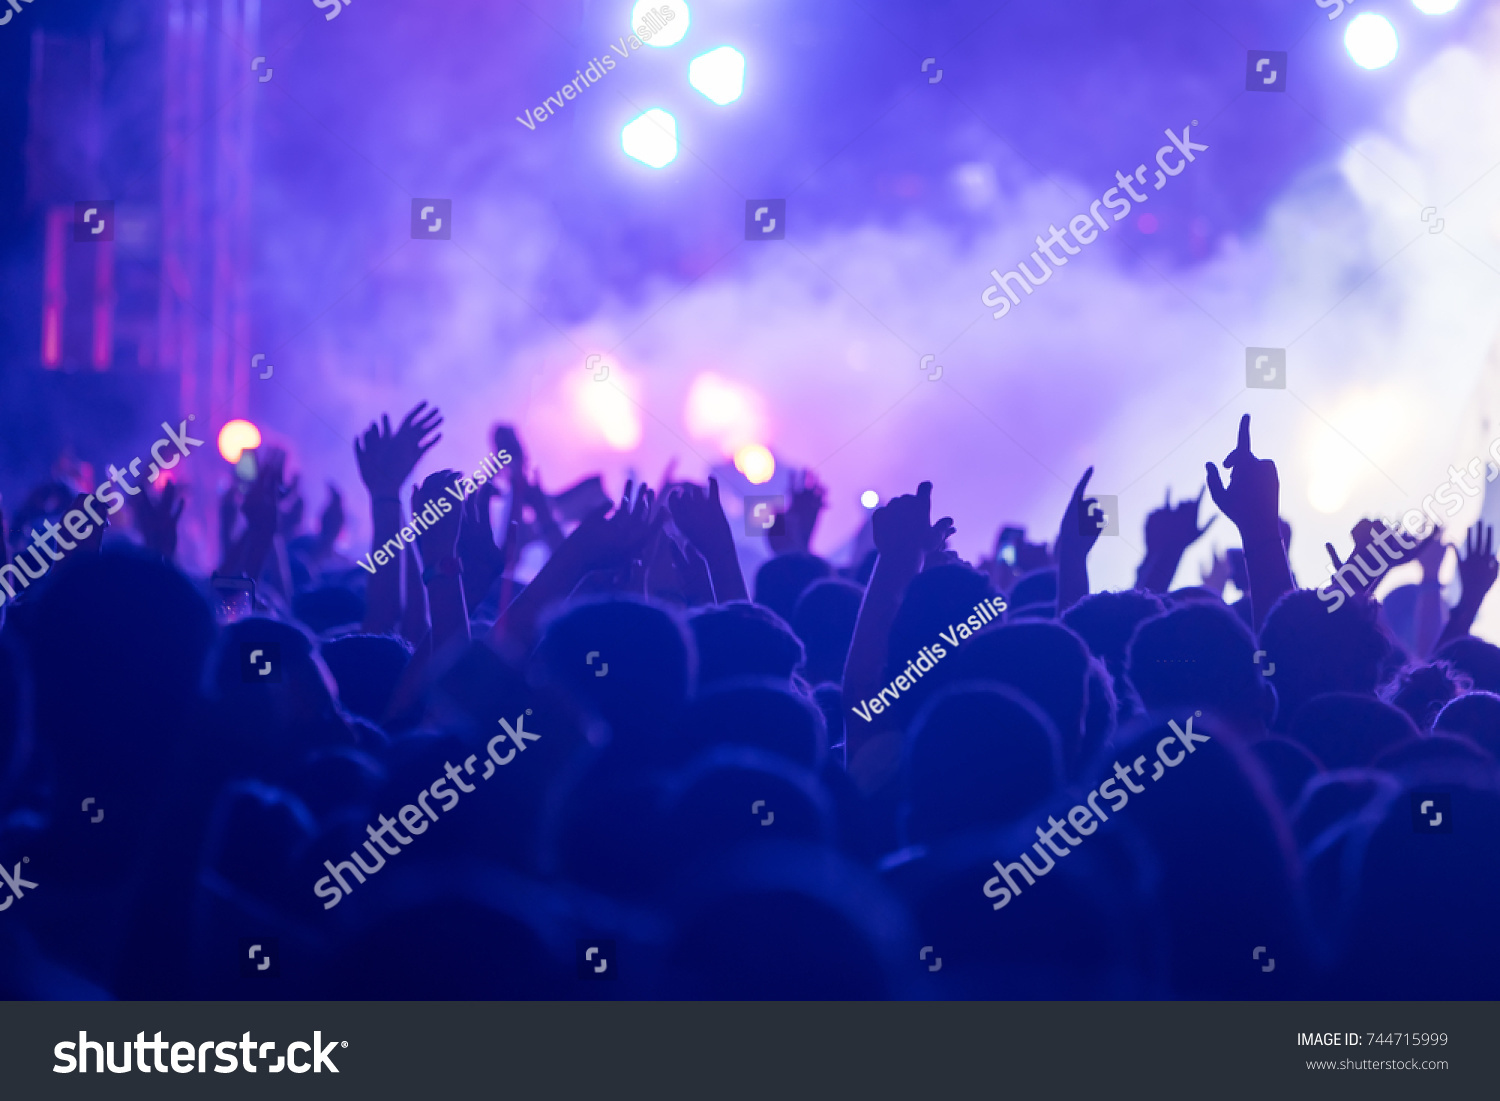 Hand with a smartphone records live music festival, Taking photo of concert stage, live concert, music festival, happy youth, luxury party, landscape exterior #744715999